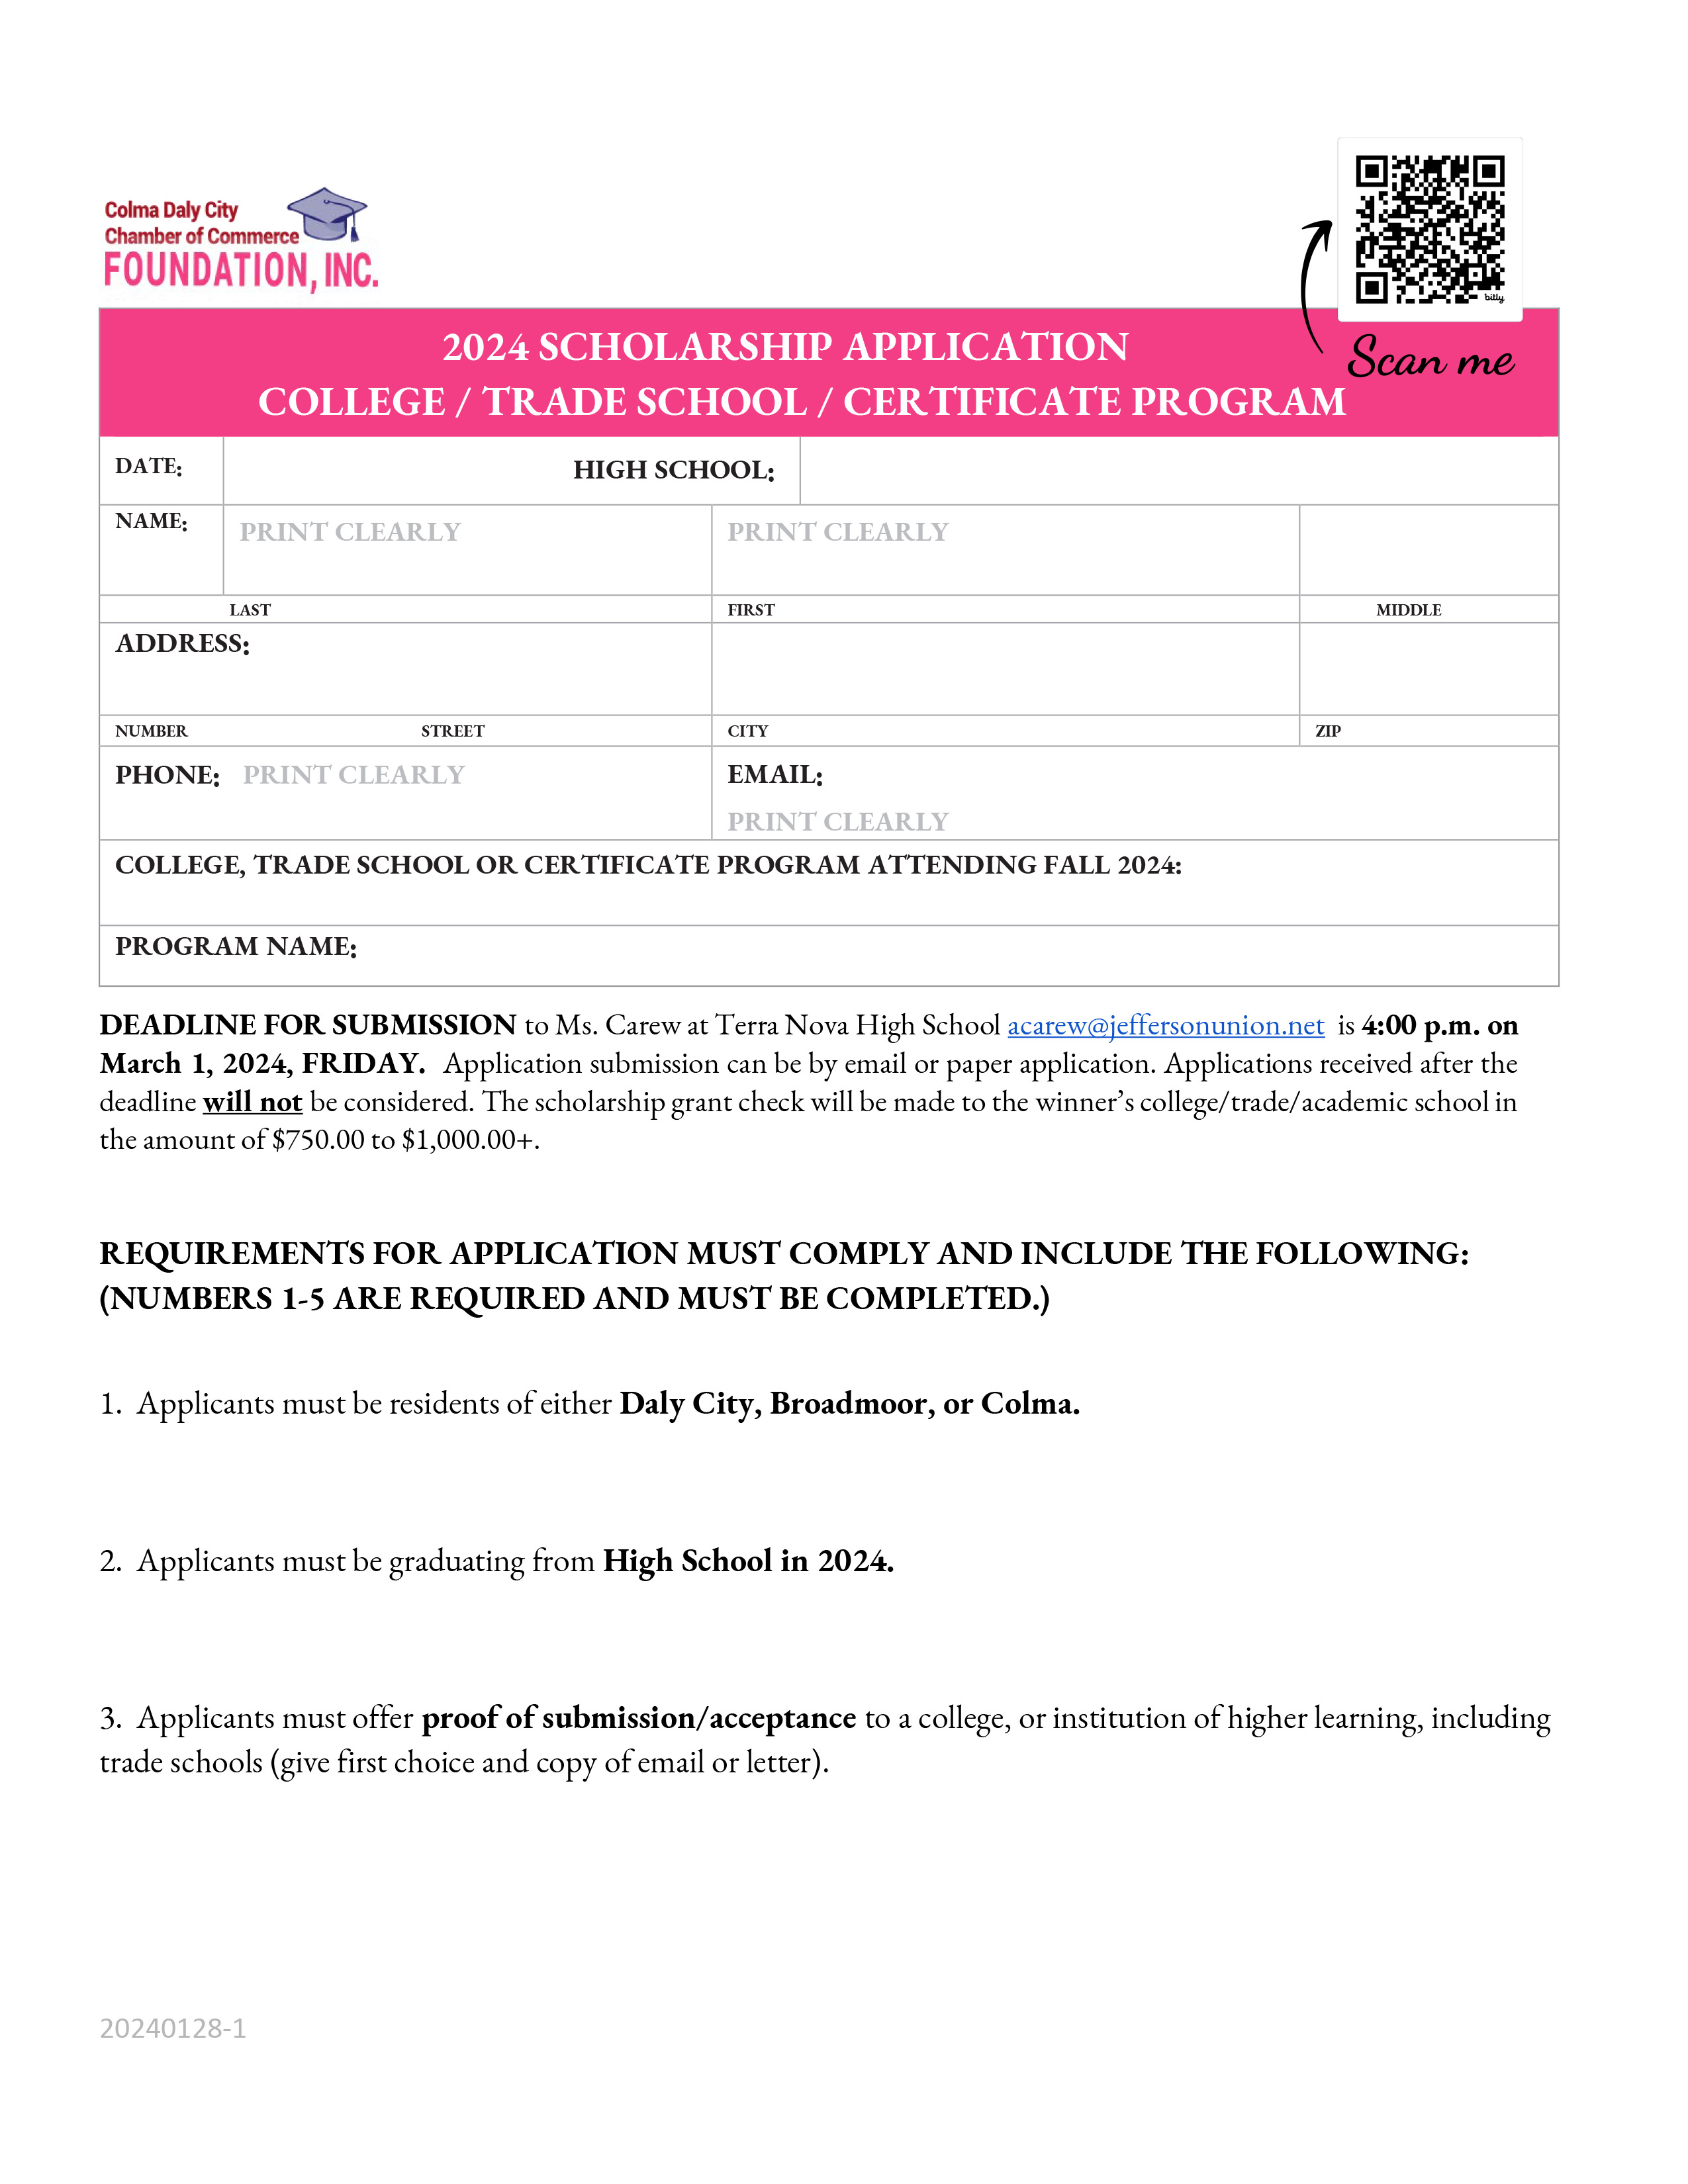 Page 1 of 3 Access to Higher Education Scholarship Application for Broadmoor, Daly City and Colma High School Seniors DUE  MARCH 1,2024